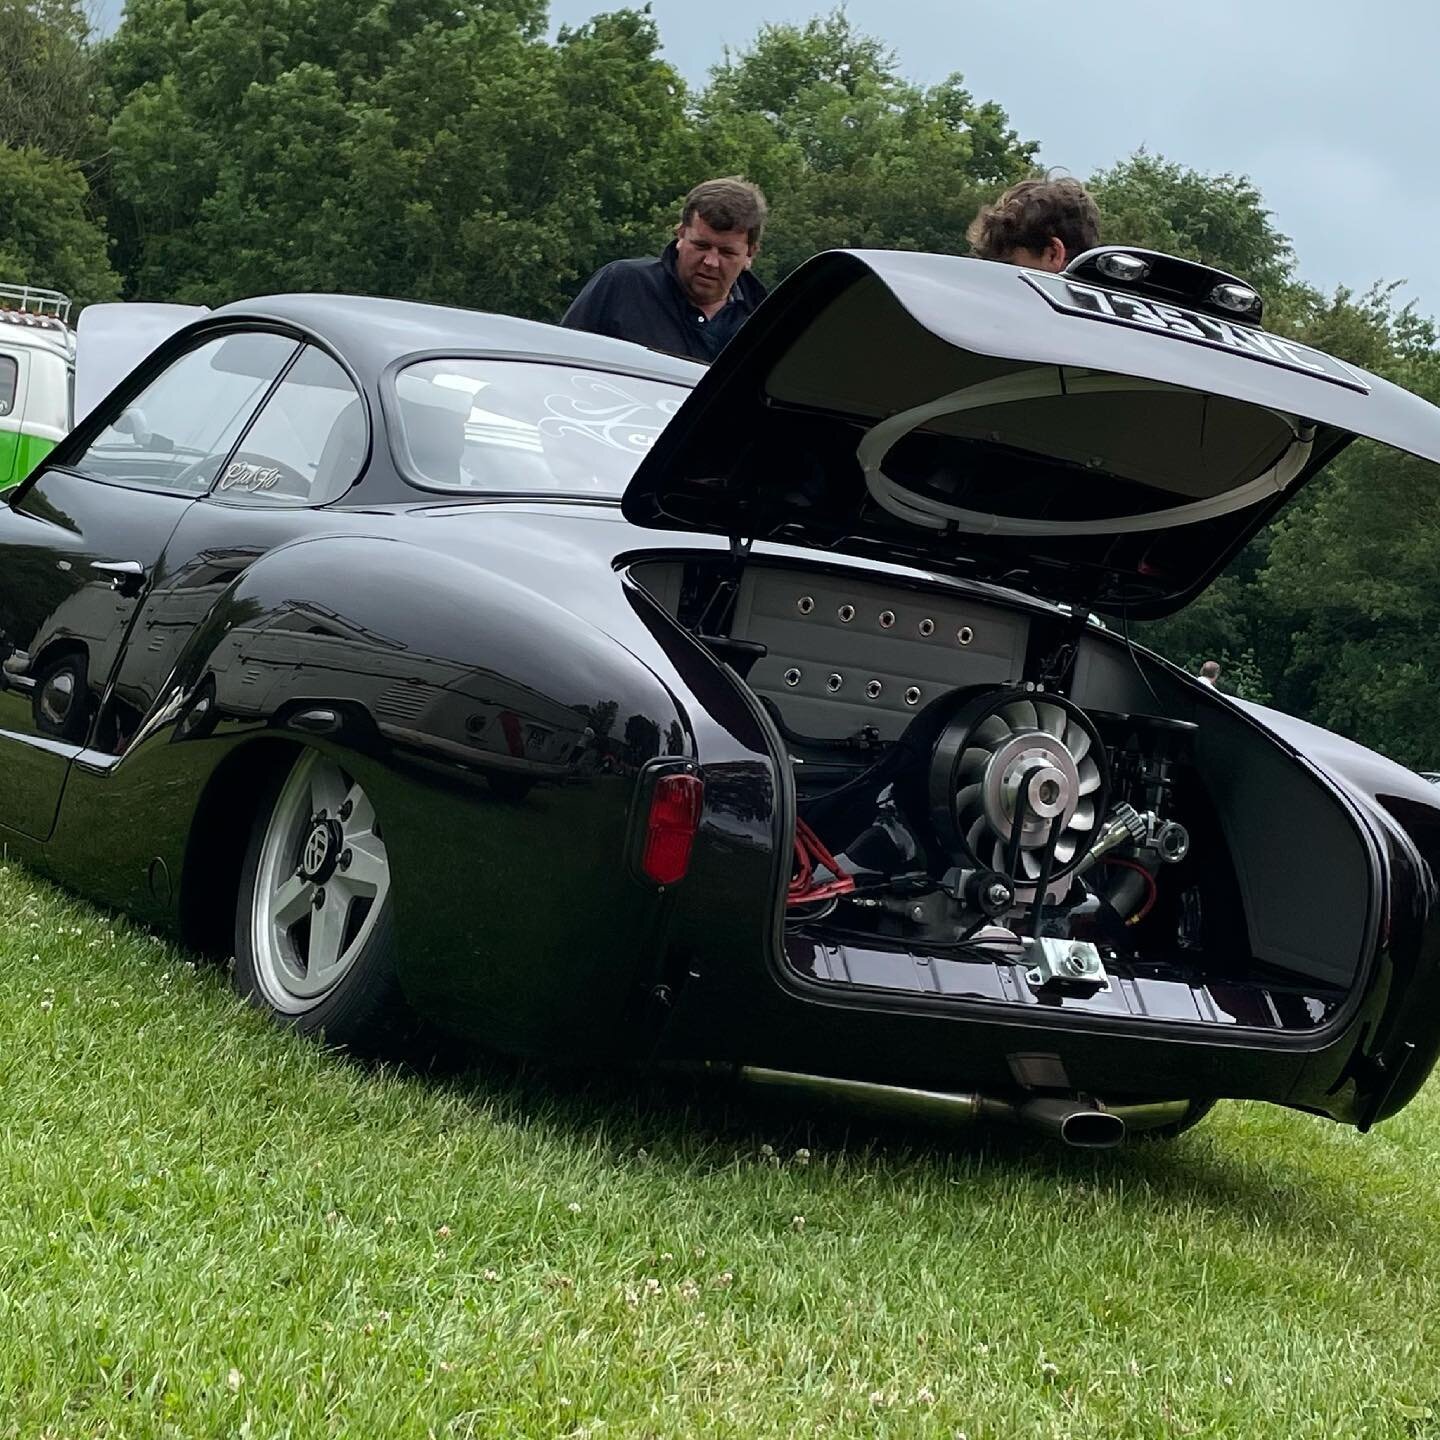 great to be on the road to normal and back at shows, and what a great show @classicsattheclubhouse #aircoolededition #aircooled #thesamba #coolflo #classicsattheclubhouse #karmannghia #lowlightghia #vwtype2 #vwbeetle #hvsuk #carstorageuk #aircooledvw